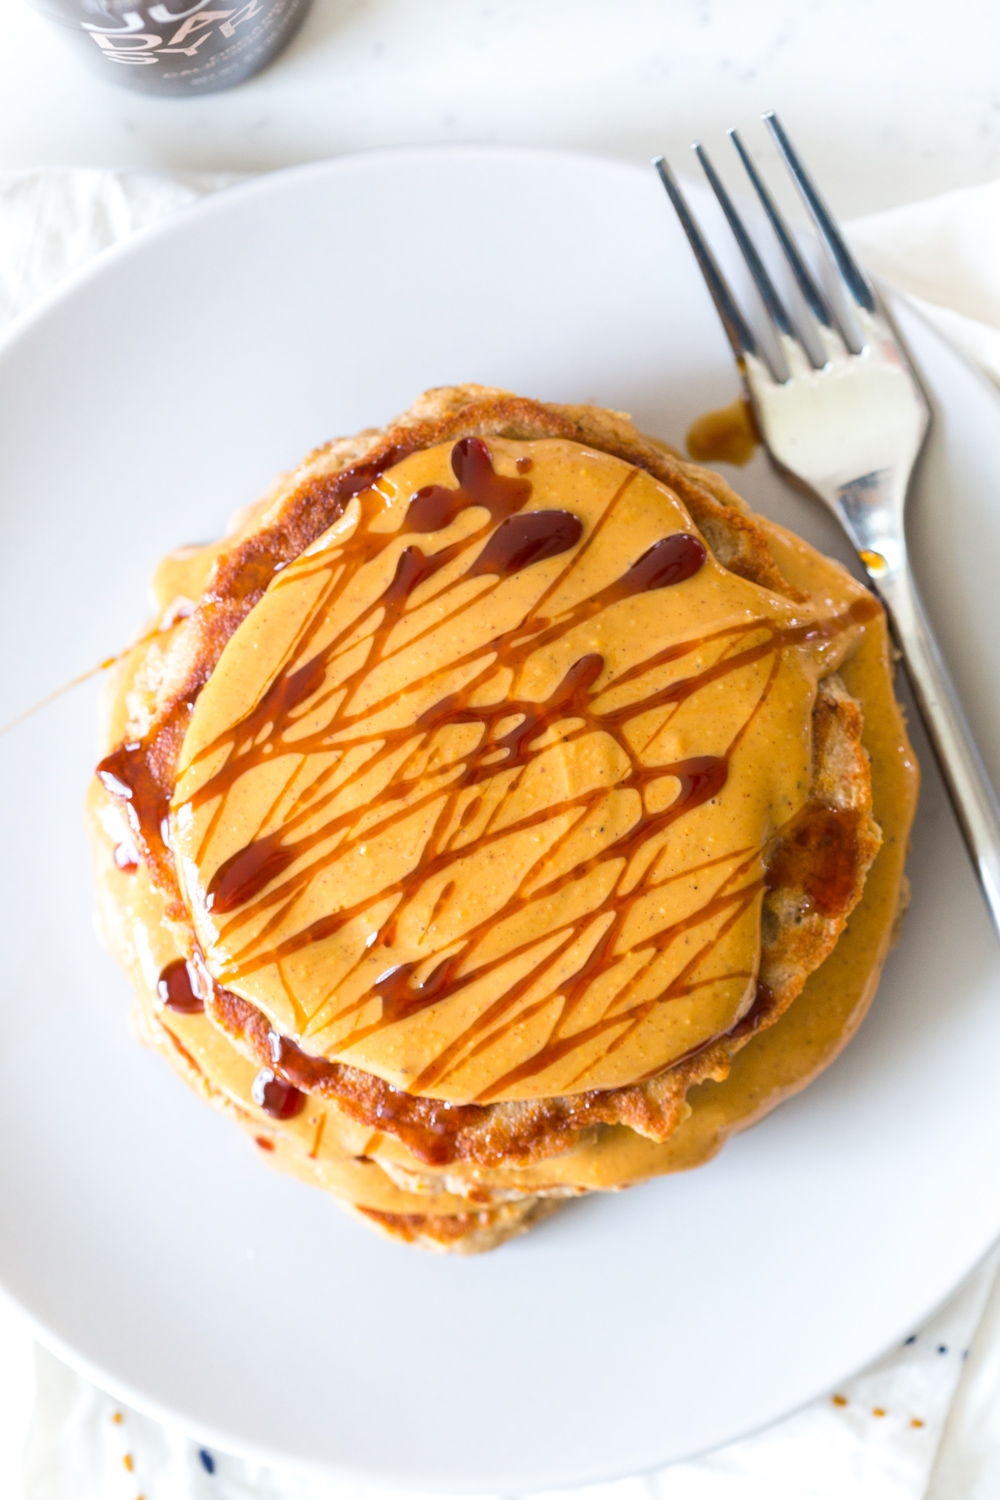 Gluten Free Almond Flour Banana Pancakes with almond butter and Just Date Syrup